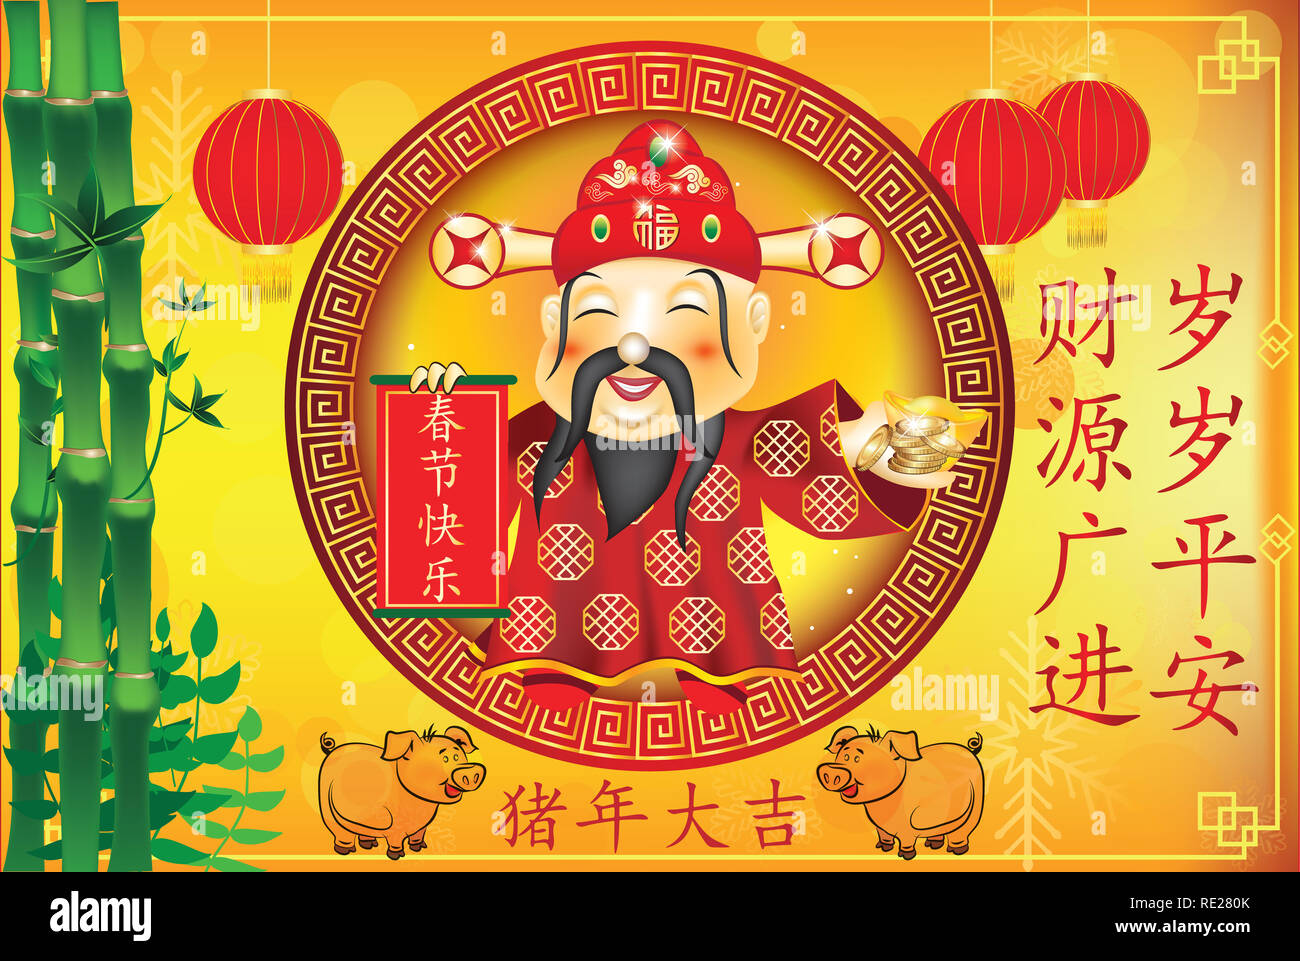 Chinese Spring Festival greeting card. Text translation: May you have peace all year round. May your financial resources increase. Stock Photo